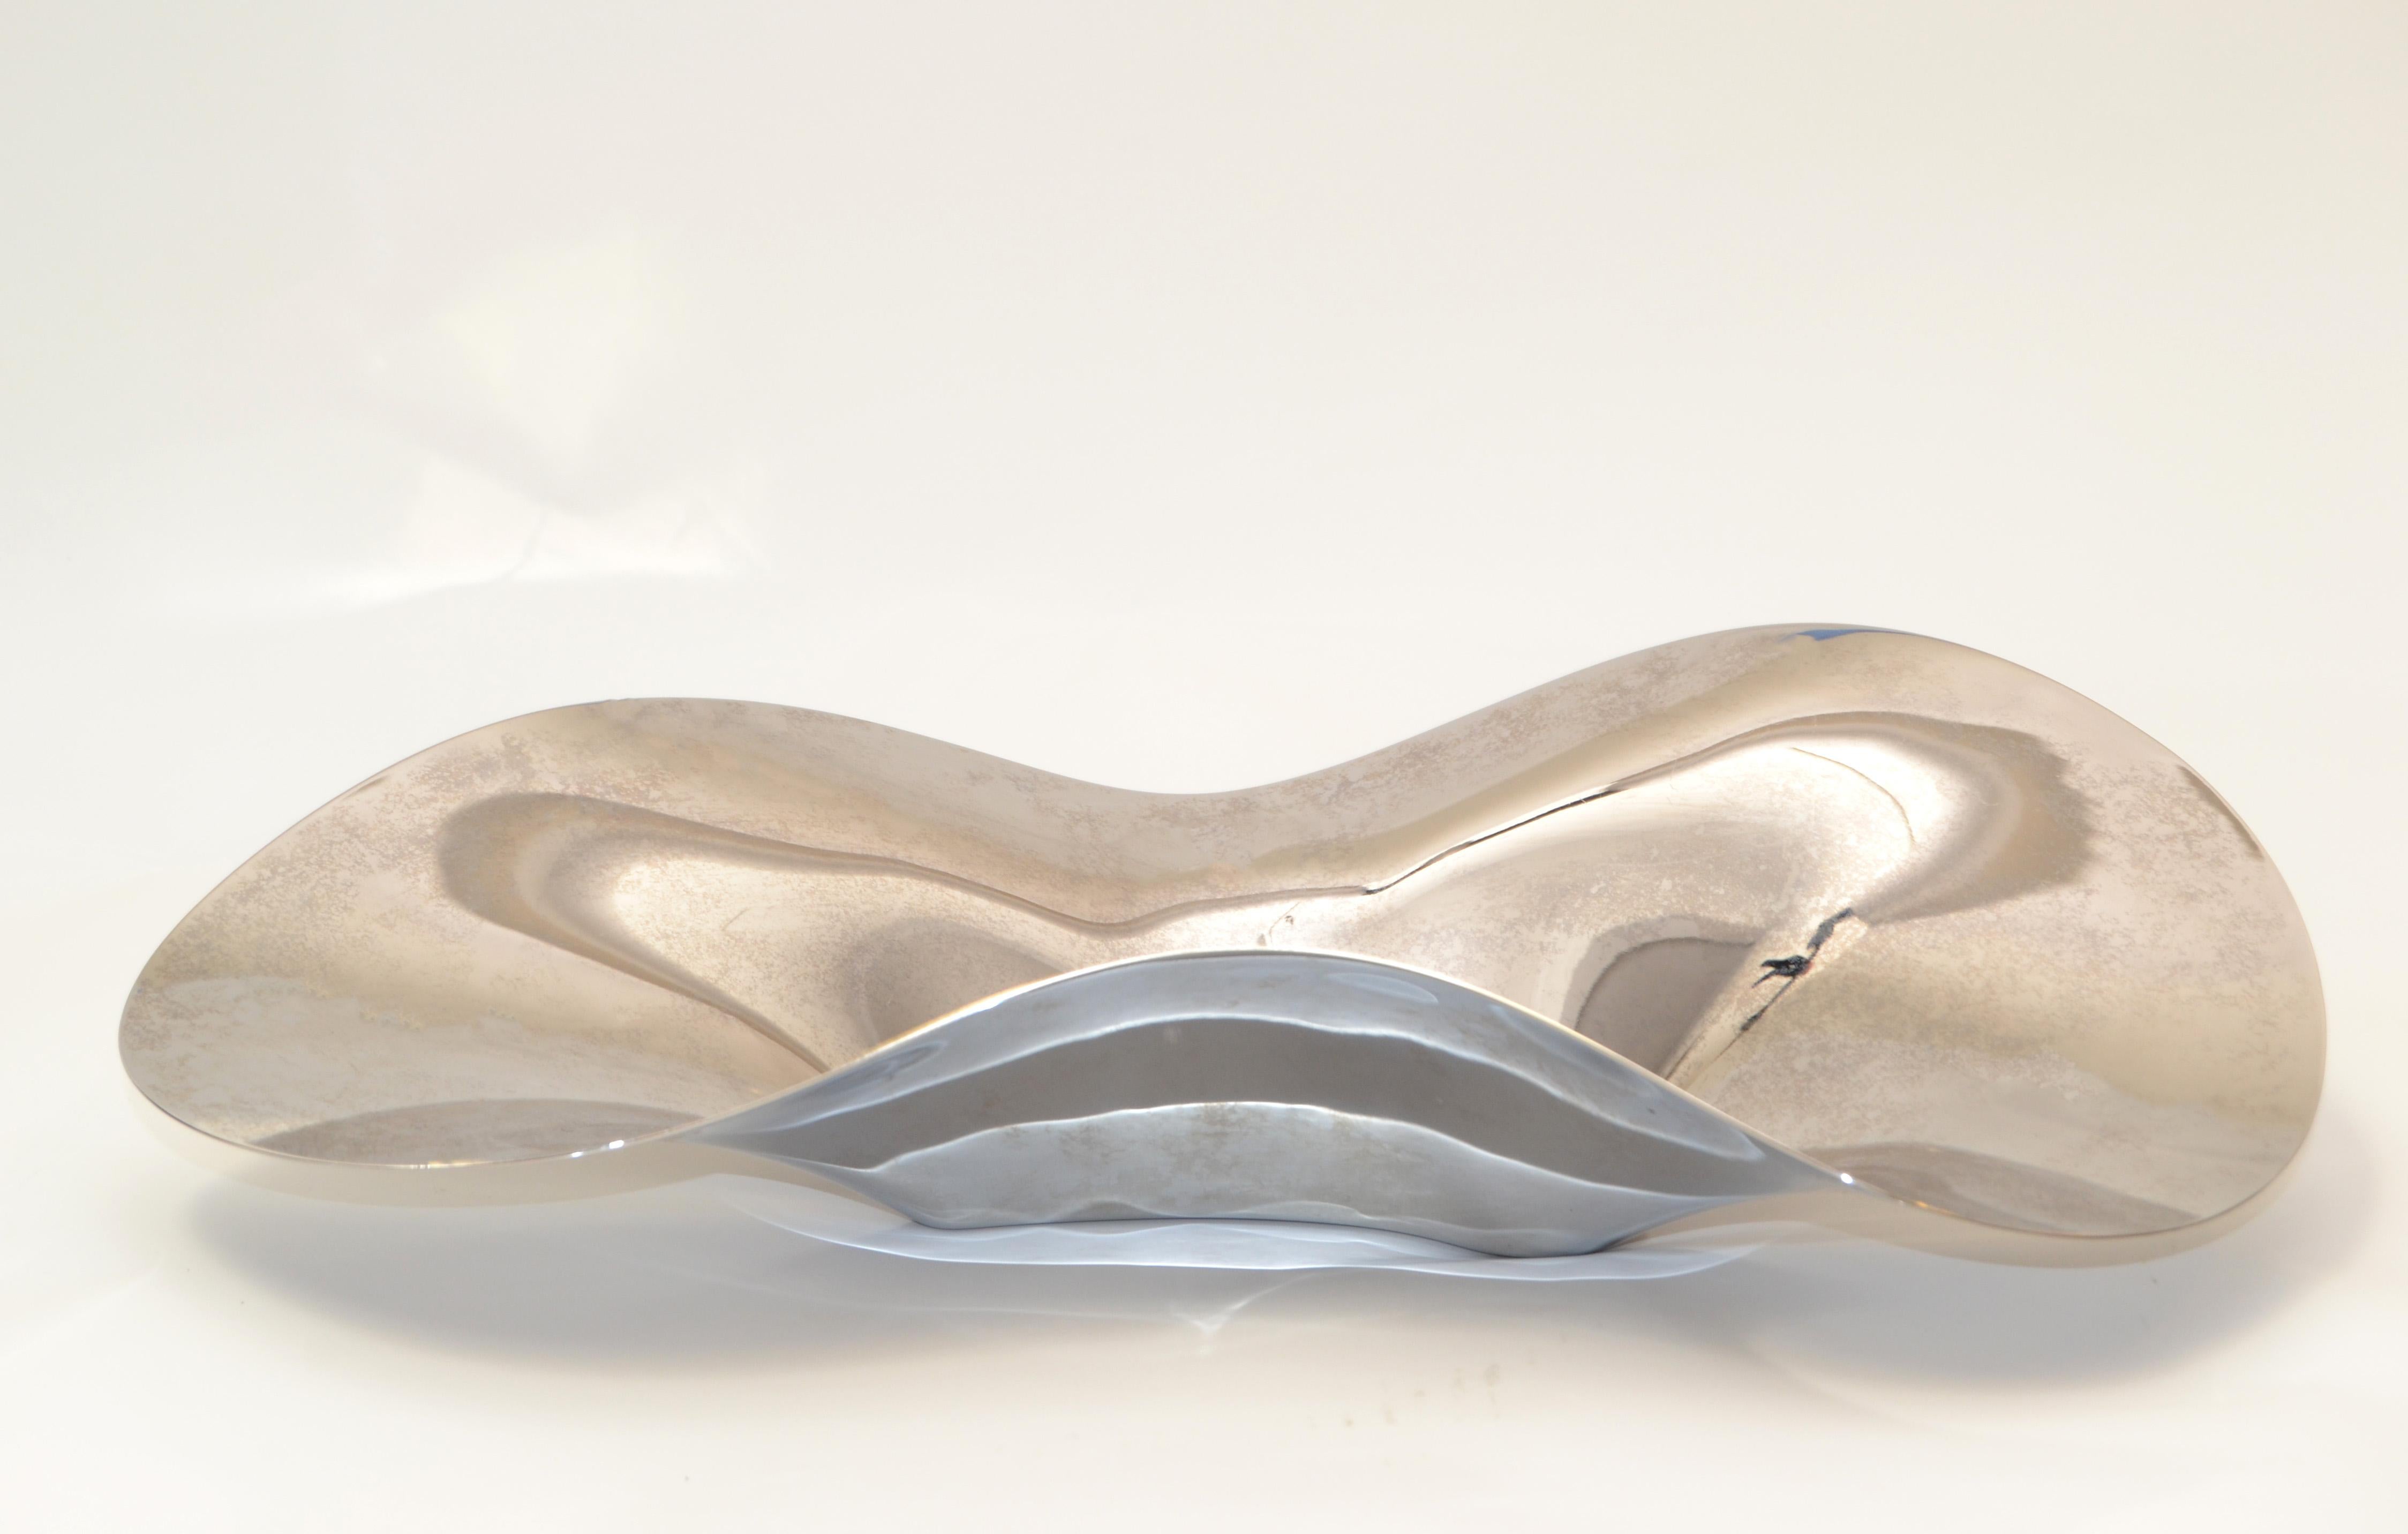 Original Georg Jensen wave serving bowl in mirrored stainless steel, Mid-Century Modern made in Denmark.
Marked underneath.
The freeform Bowl serves well as centerpiece for Fruit or snacks.